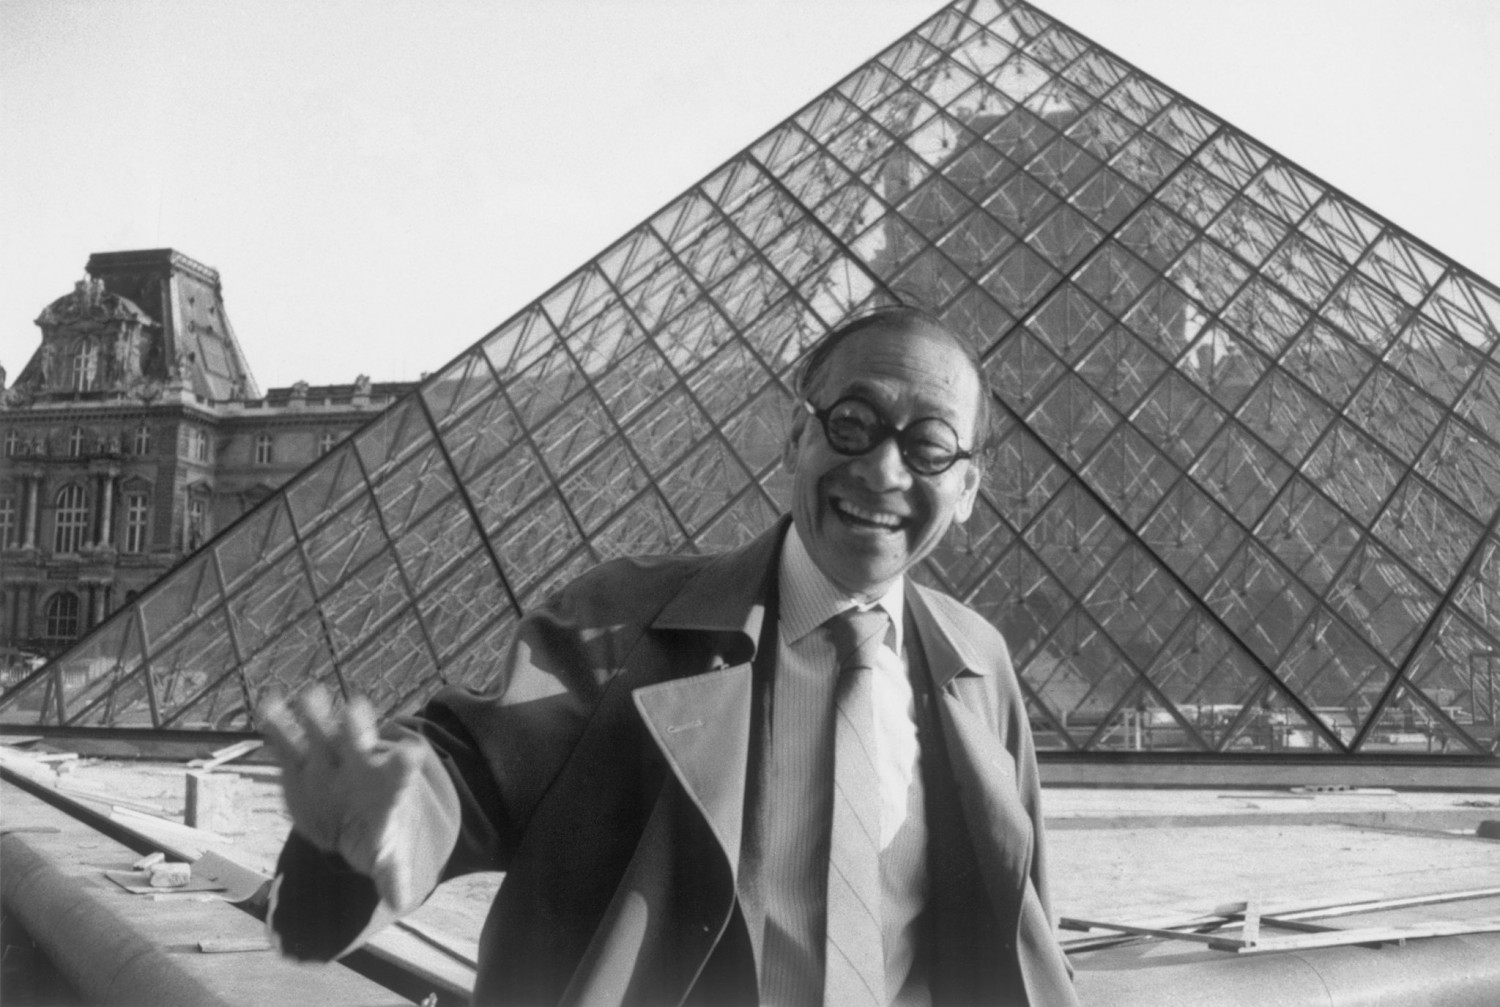 I.M. Pei, Master Architect Whose Buildings Dazzled the World, Dies at 102